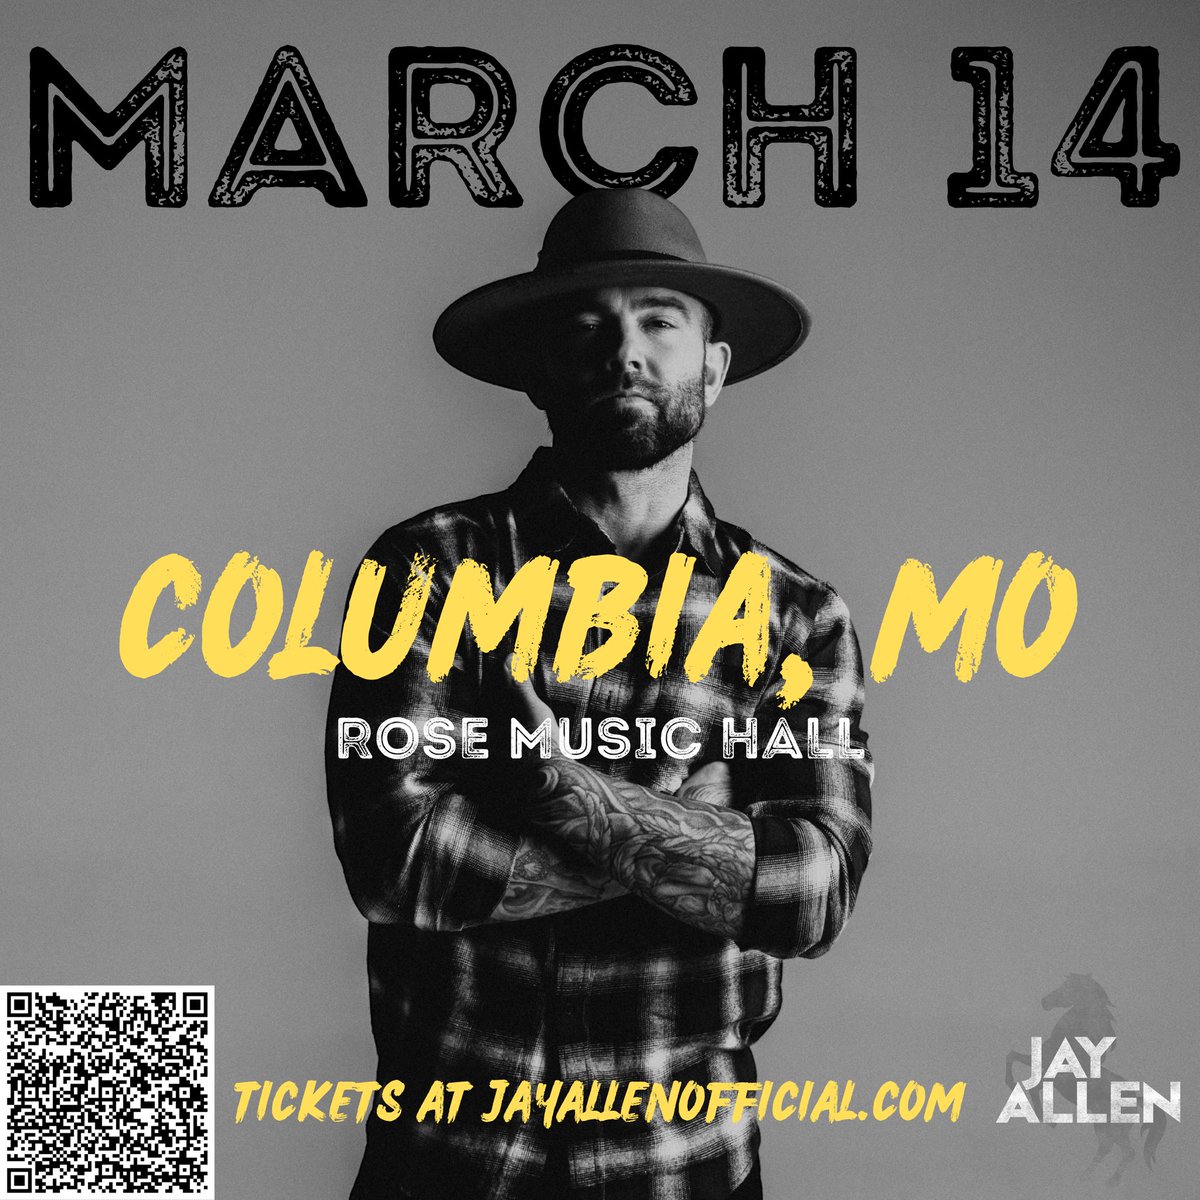 Get your tickets now! rosemusichall.com/event/jay-alle…